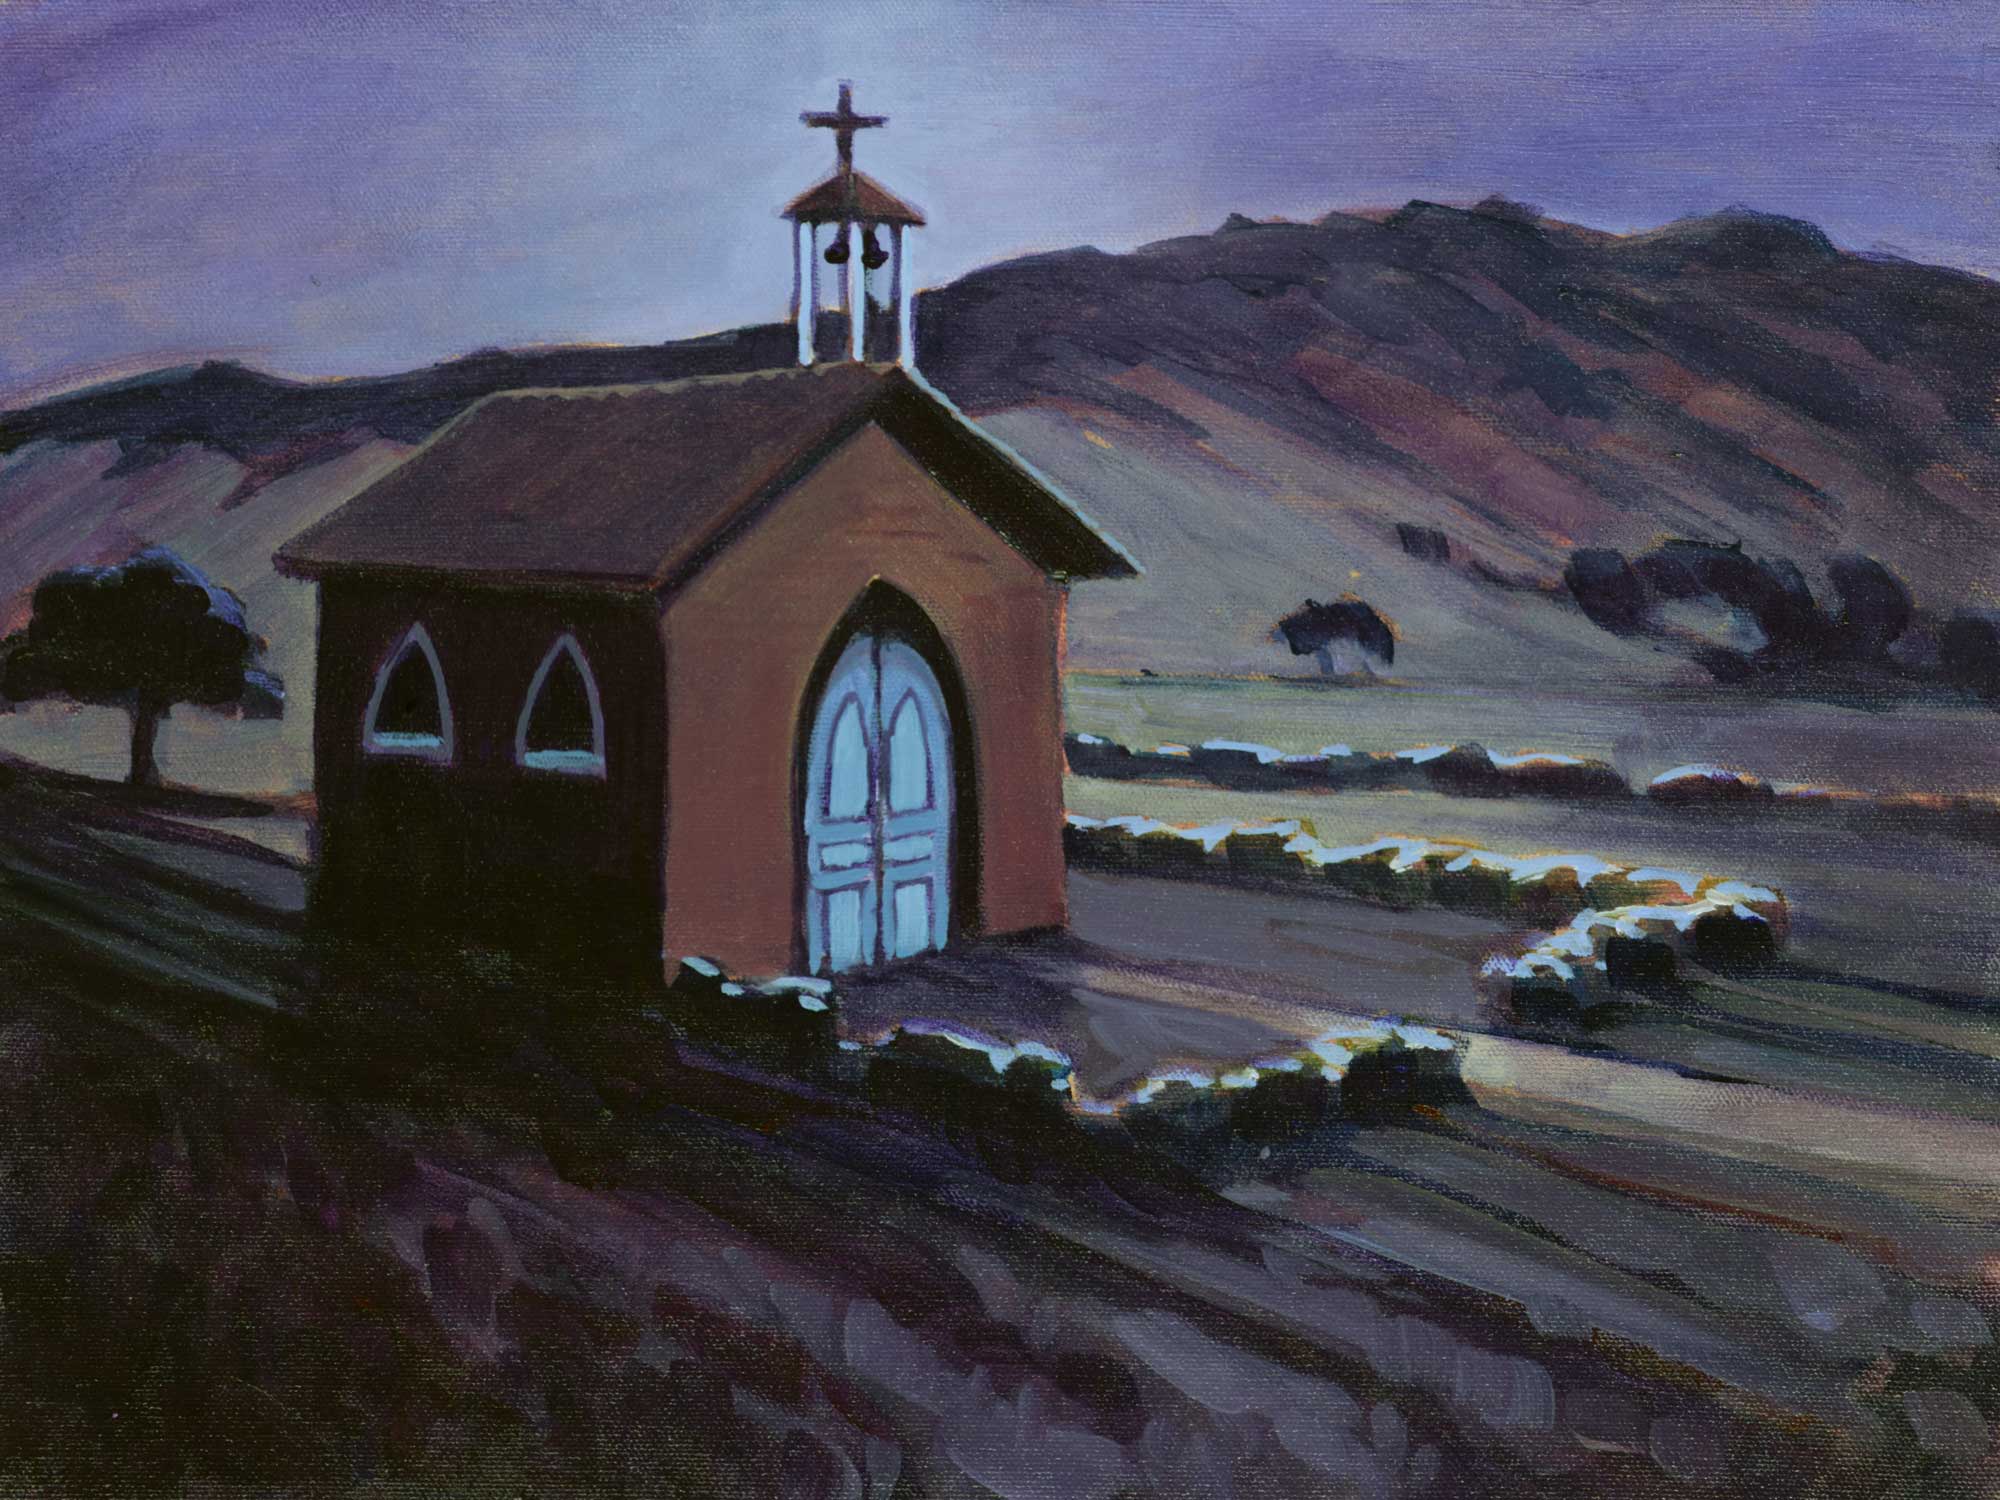 A plein air nocturne painting of a Chapel on Santa Cruz Channel Island off the coast of Southern California